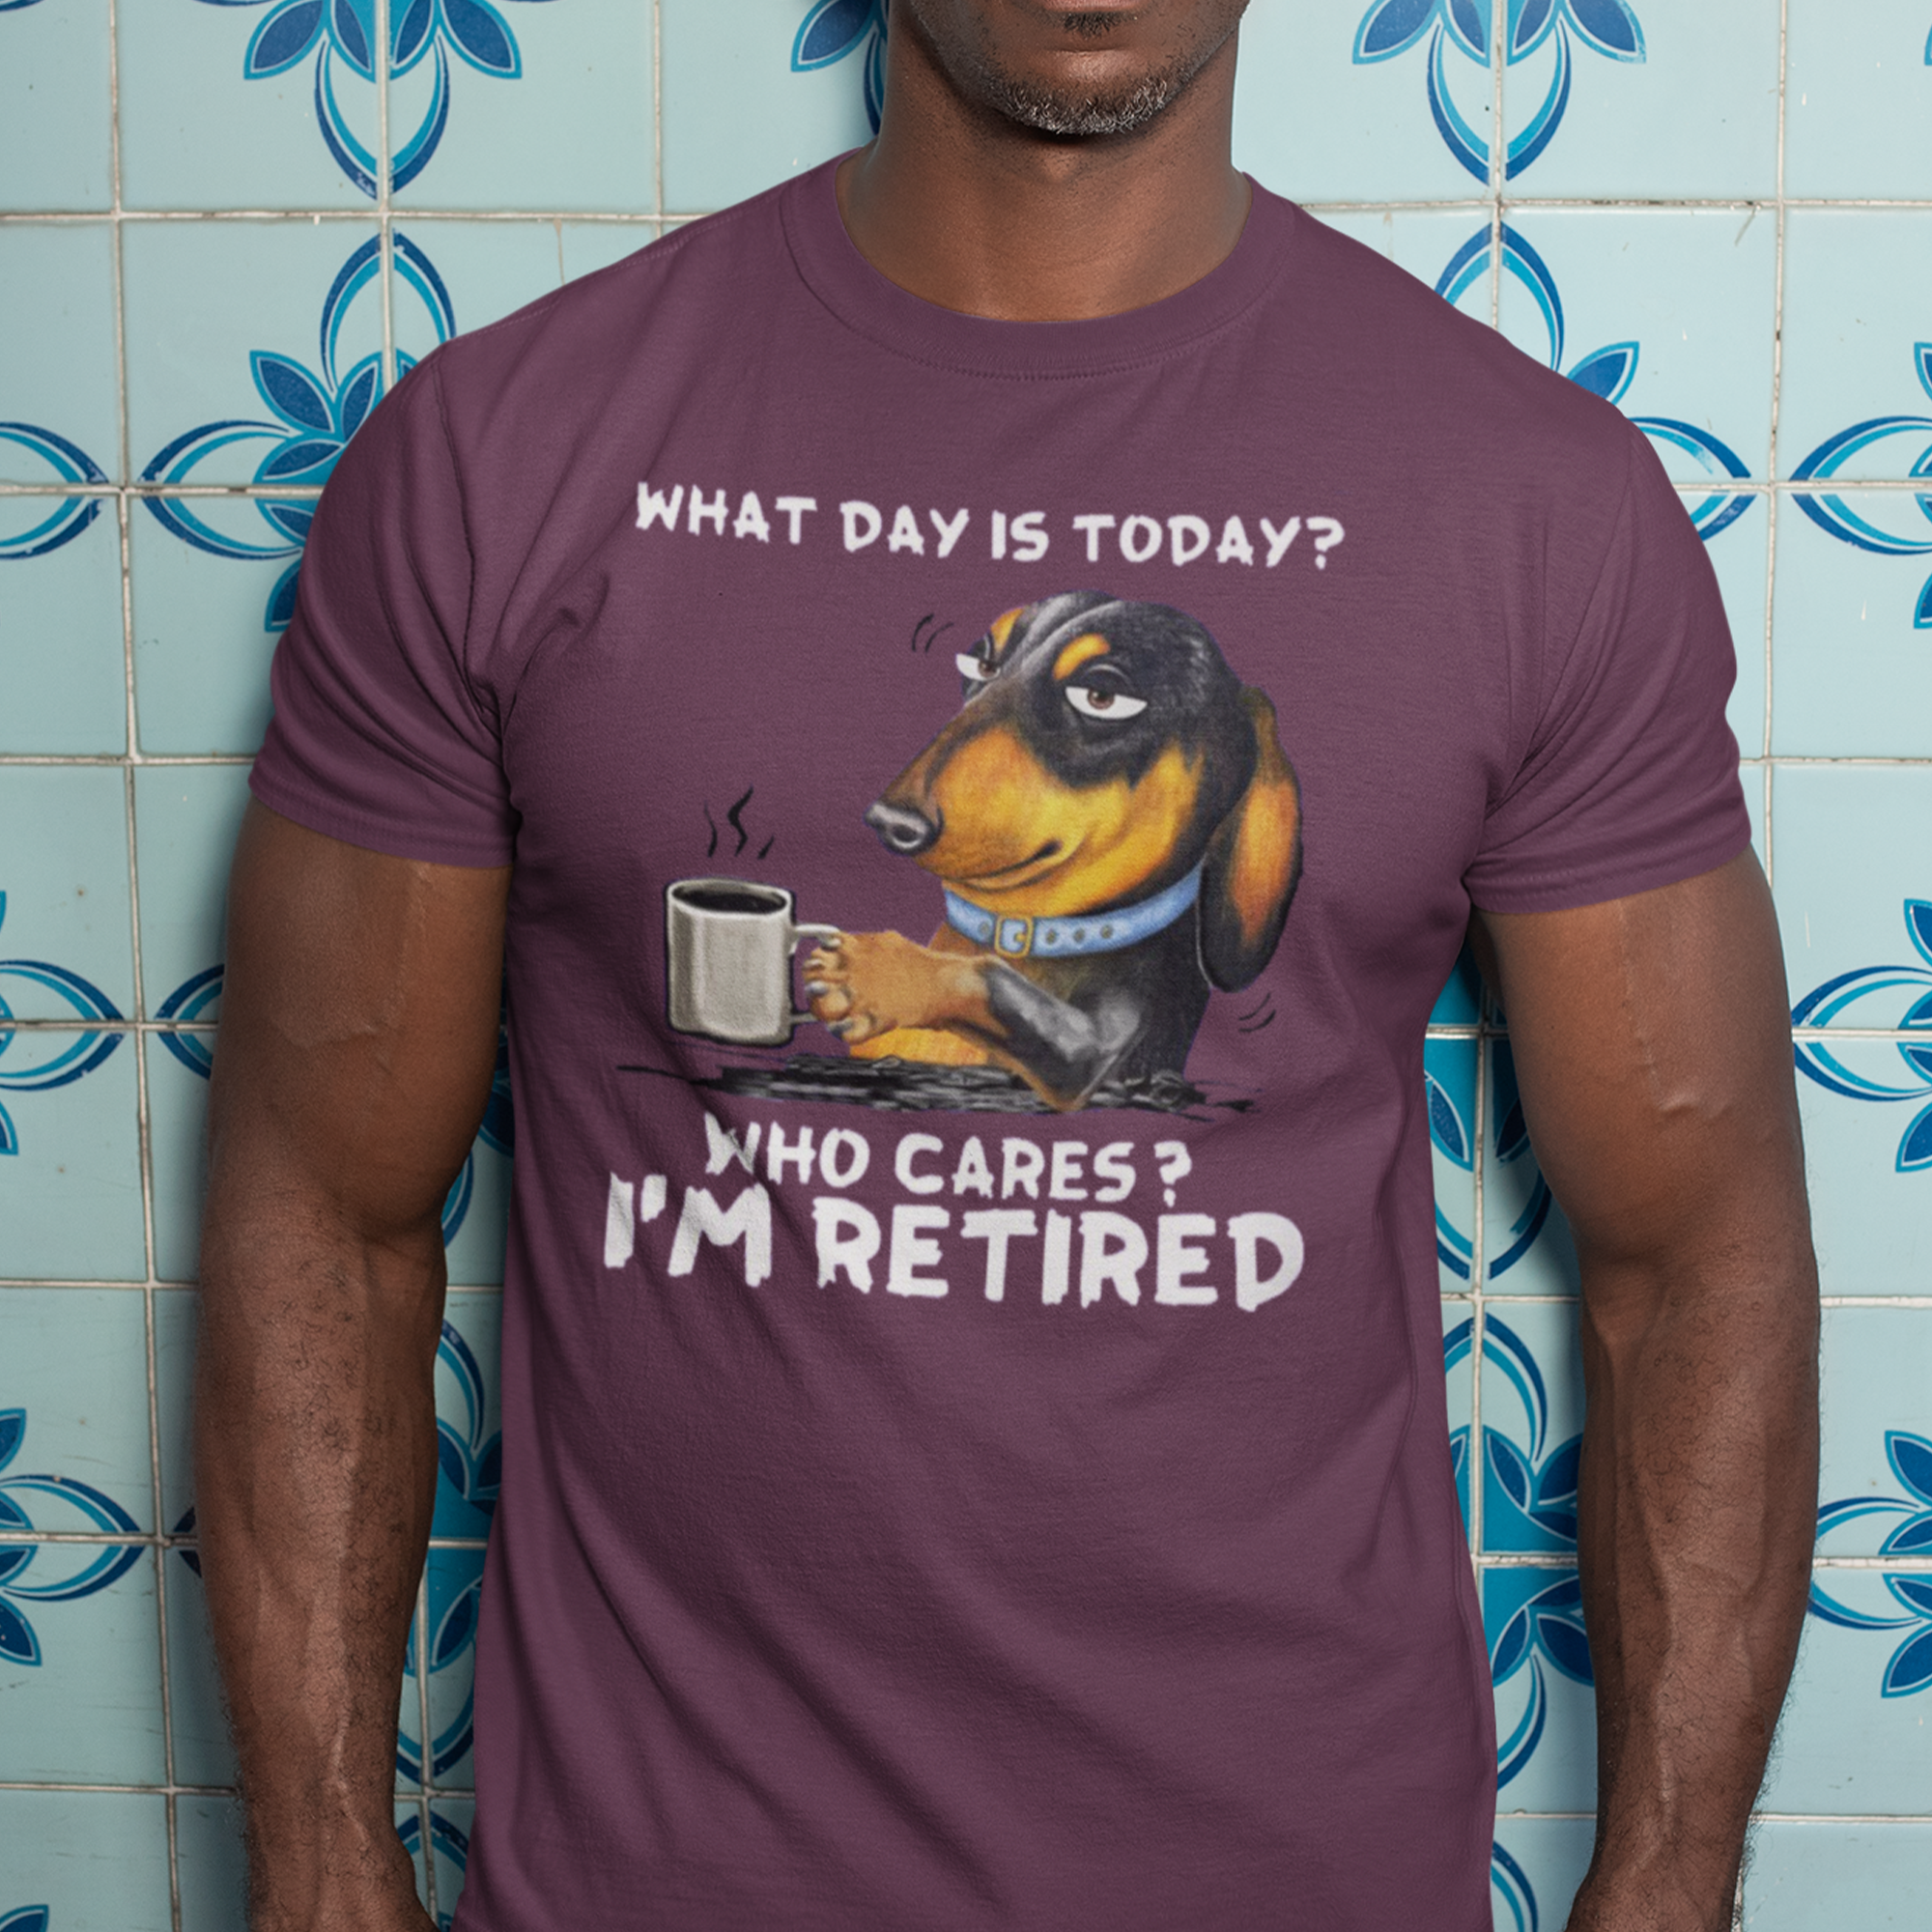 What Day Is Today, Who Cares I'm Retired Shirt, Funny Shirt